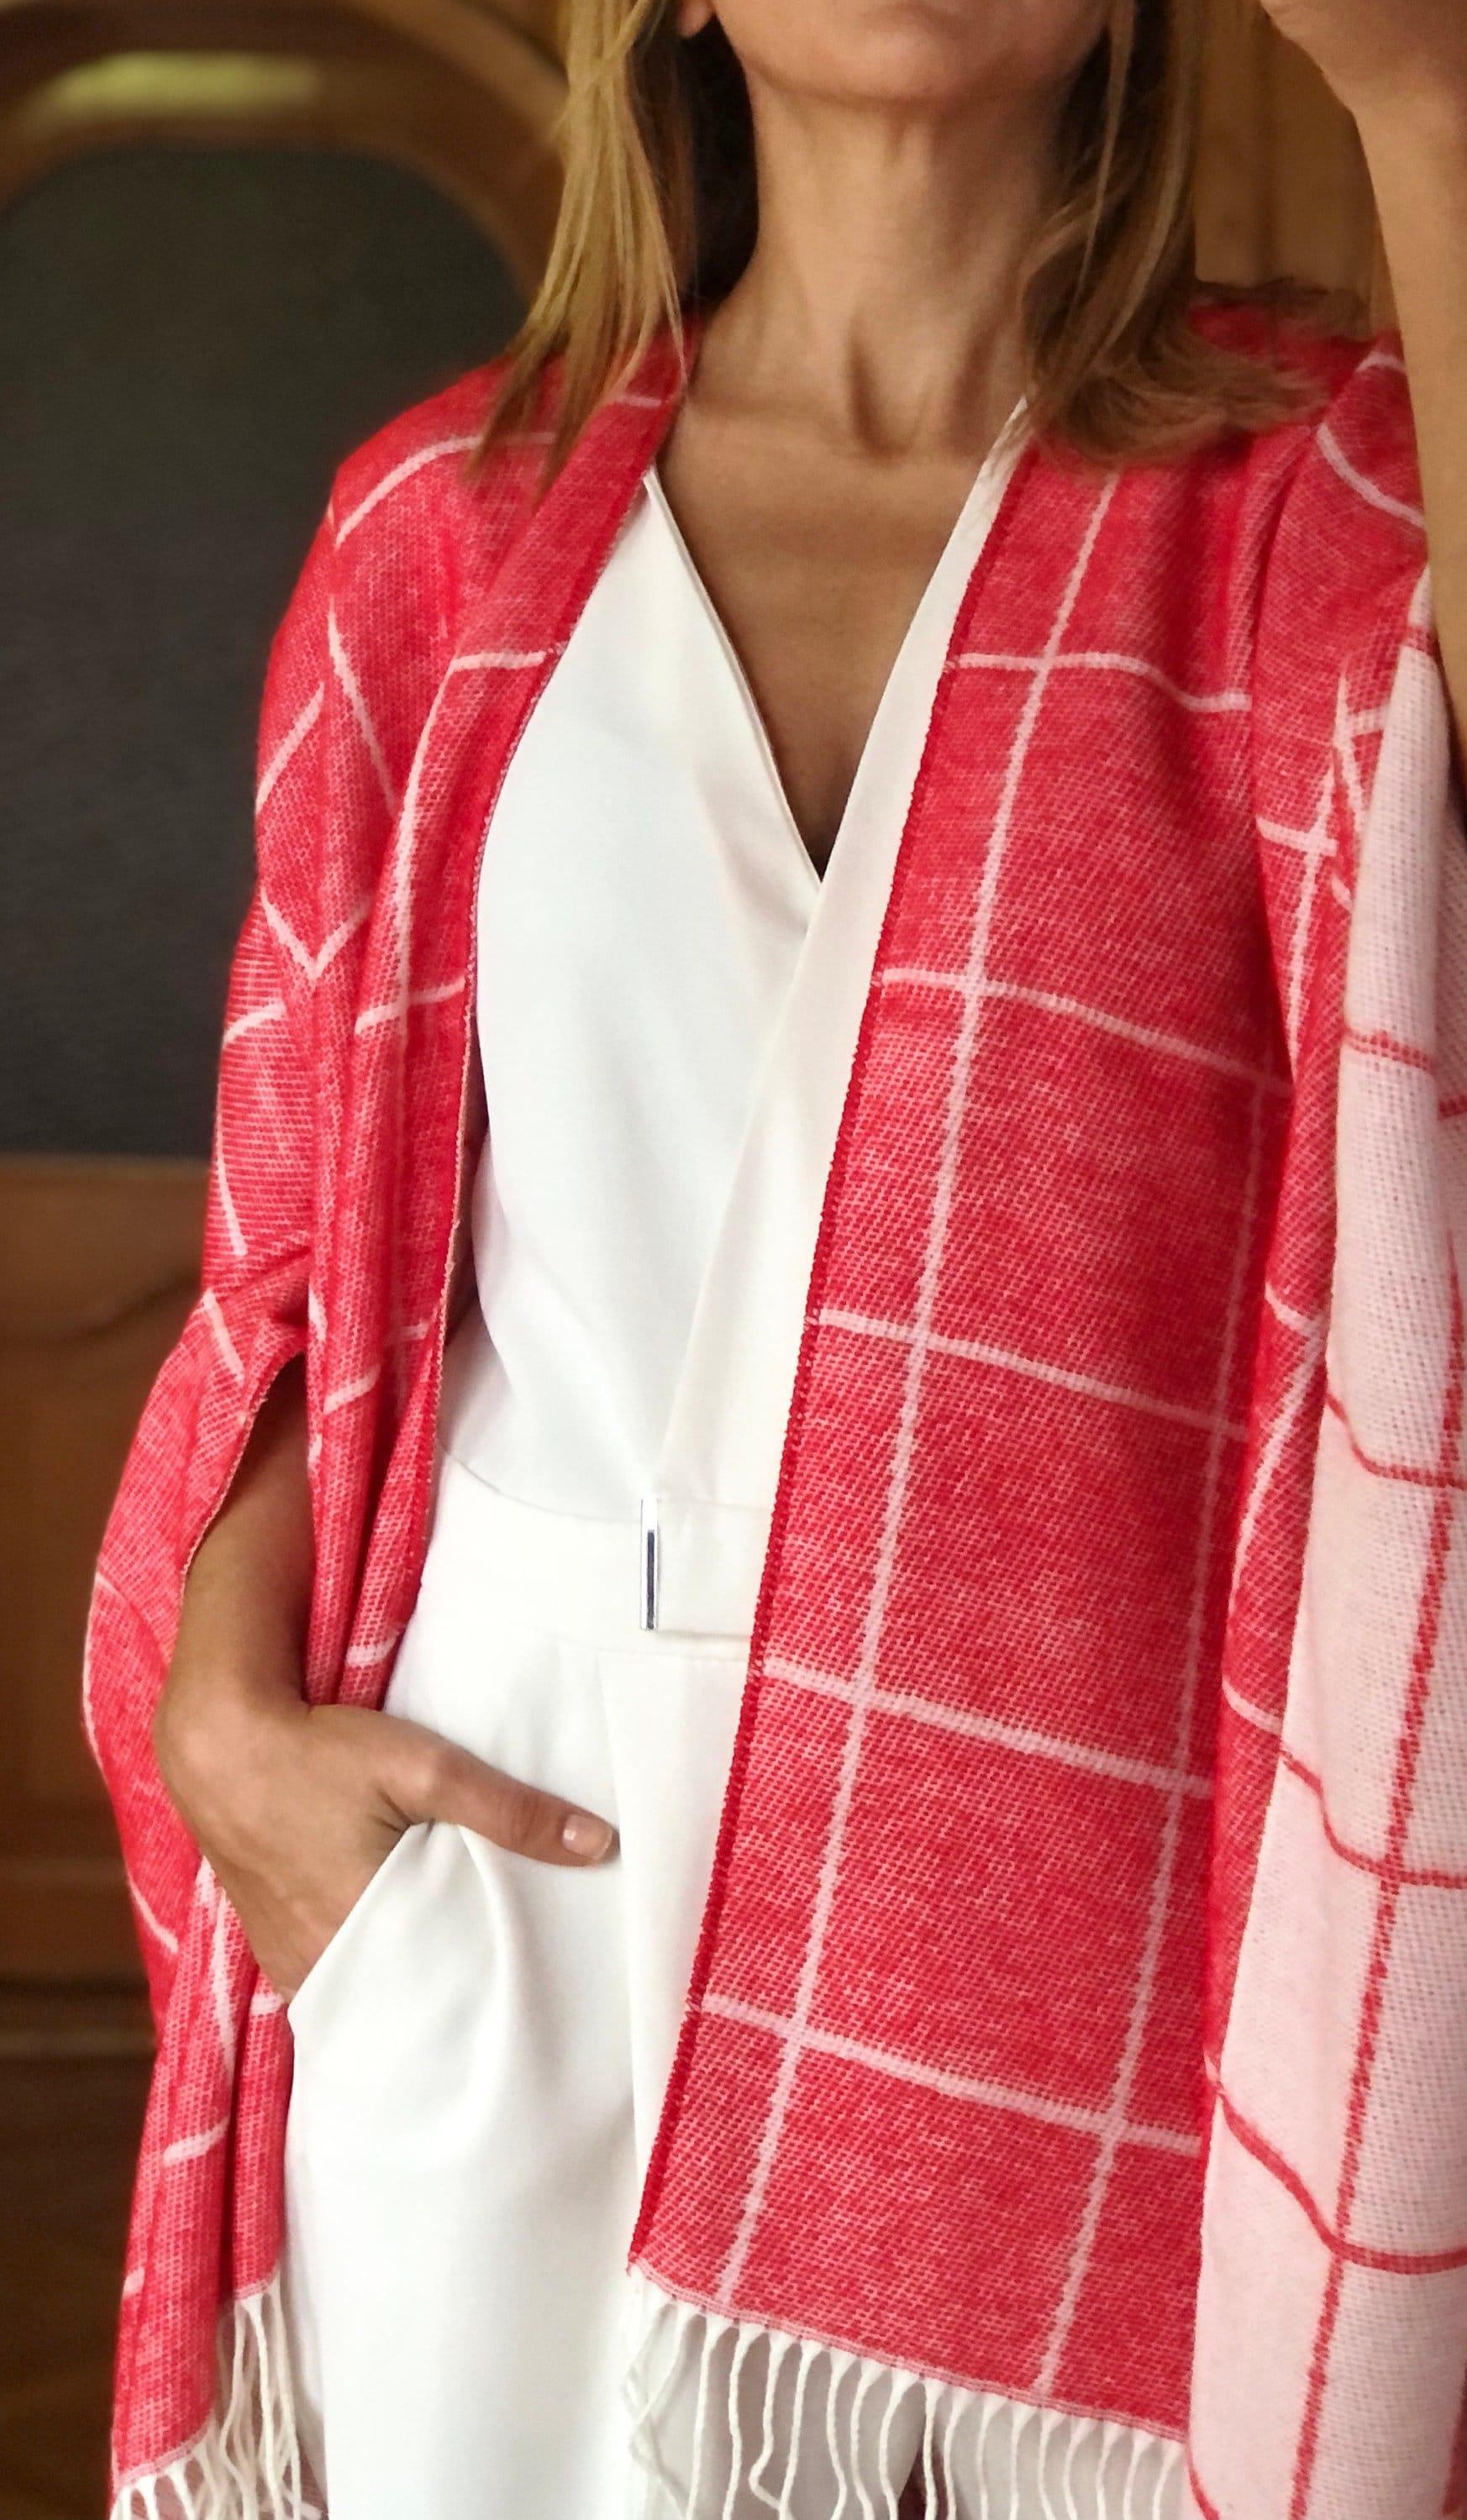 Exquisite Cozy and Stylish: Reversible Plaid Wool Poncho - Perfect for Autumn and Winter, Ideal Gift for Special Occasions available at Moyoni Design